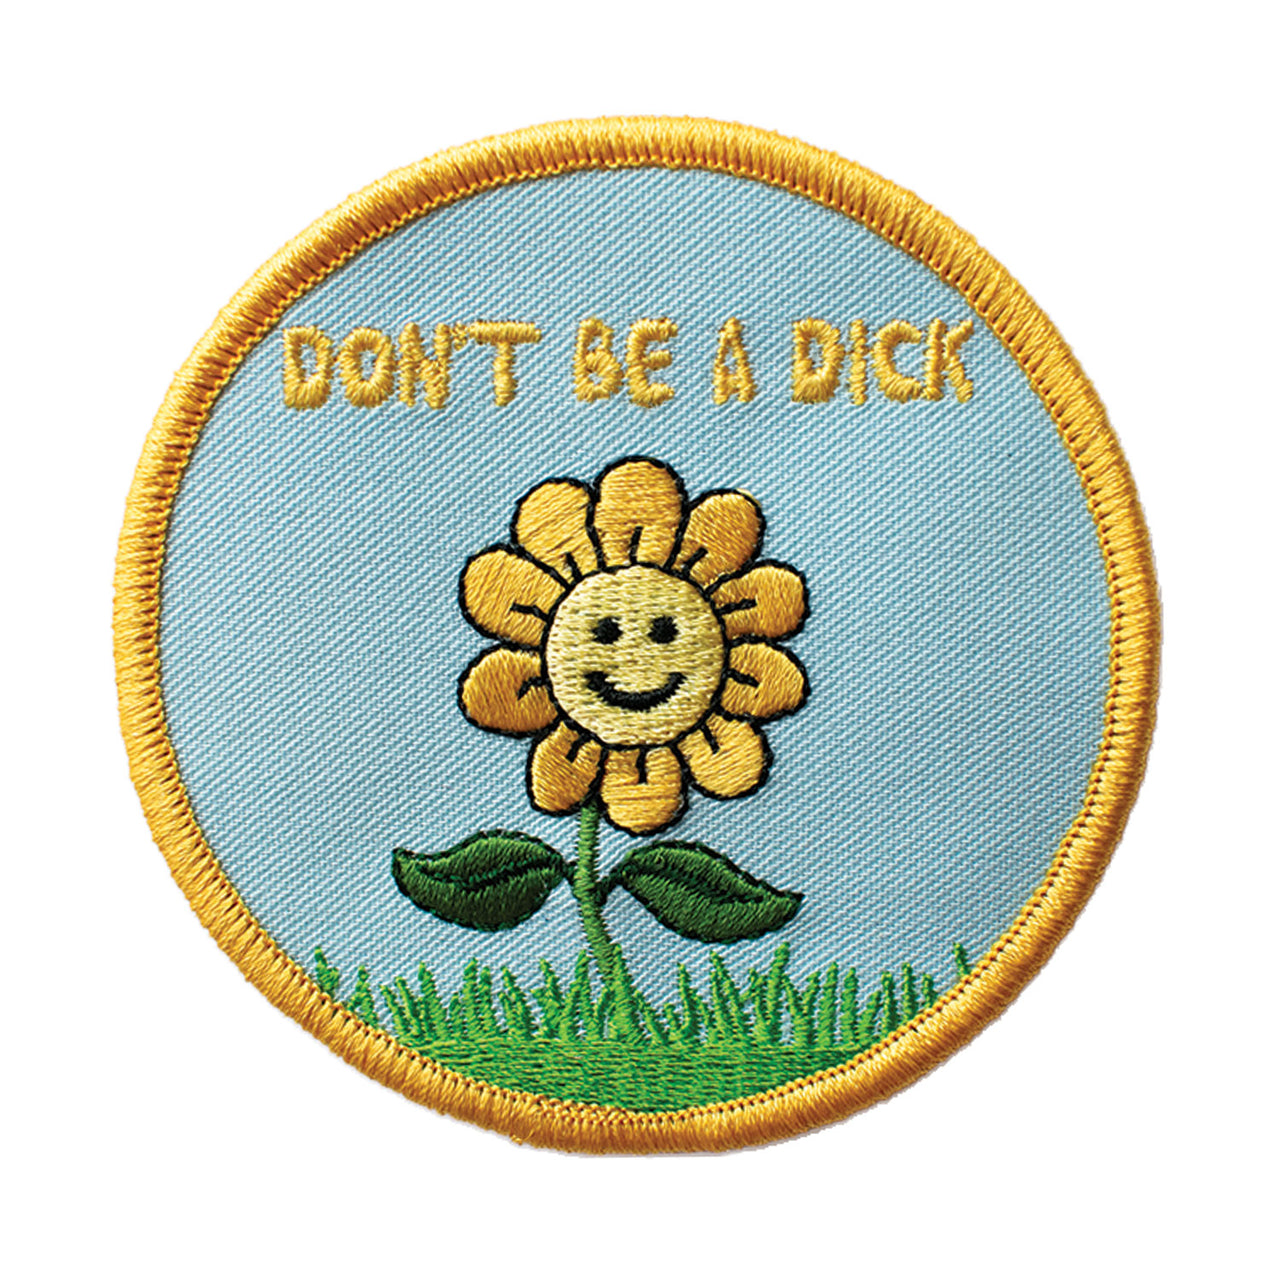 Don't Be A Dick (Hook & Loop Patch)